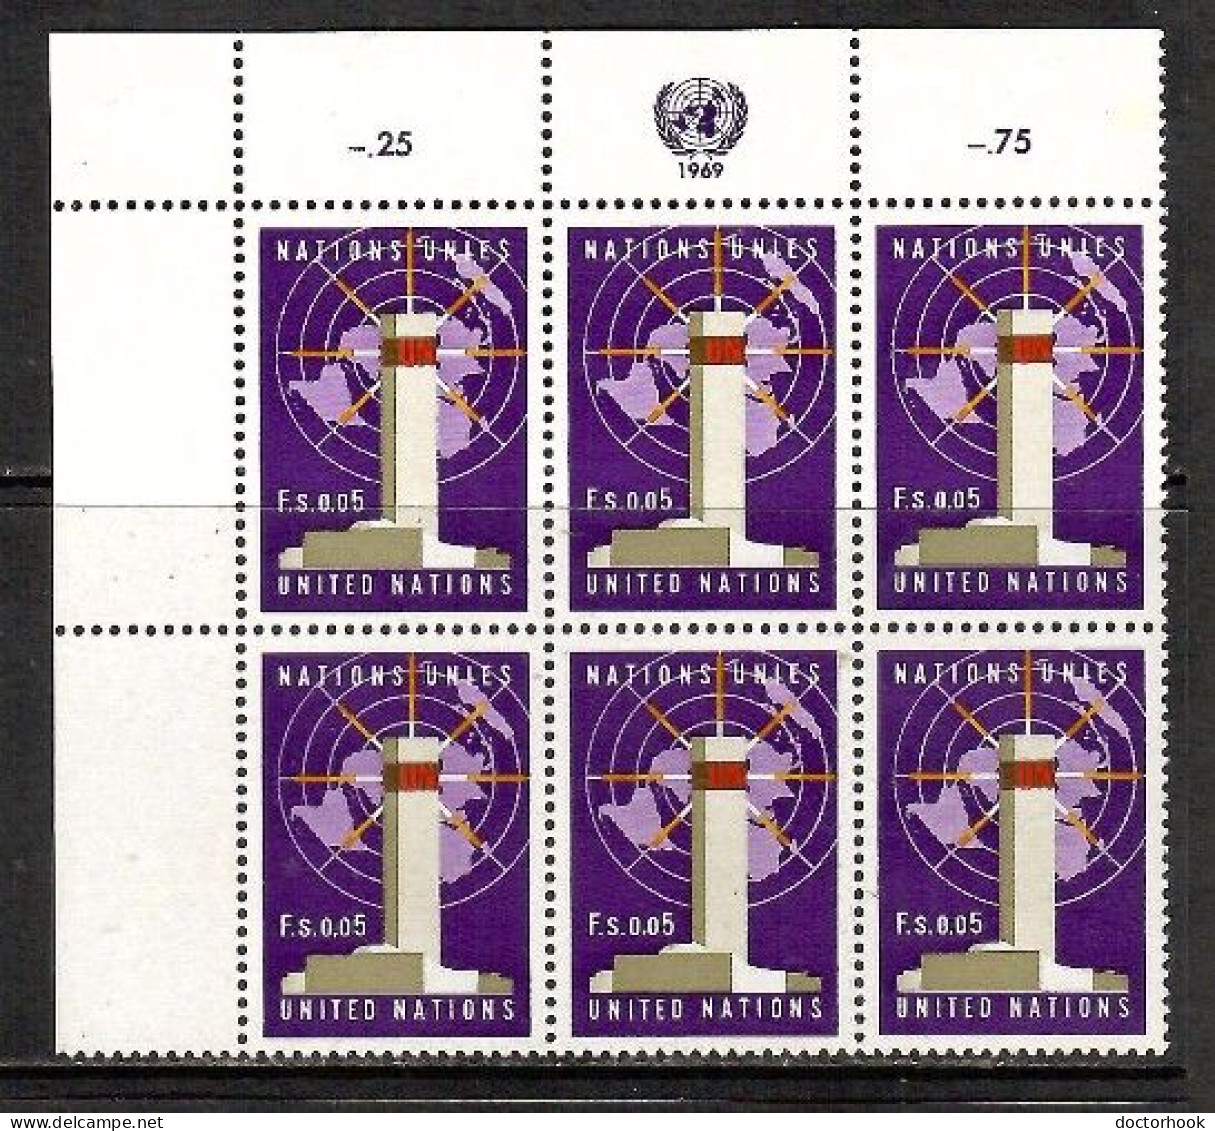 UNITED NATIONS---Geneva  Scott # 1** MINT NH INSCRIPTION BLOCK Of 6 (CONDITION AS PER SCAN) (LG-1695) - Unused Stamps